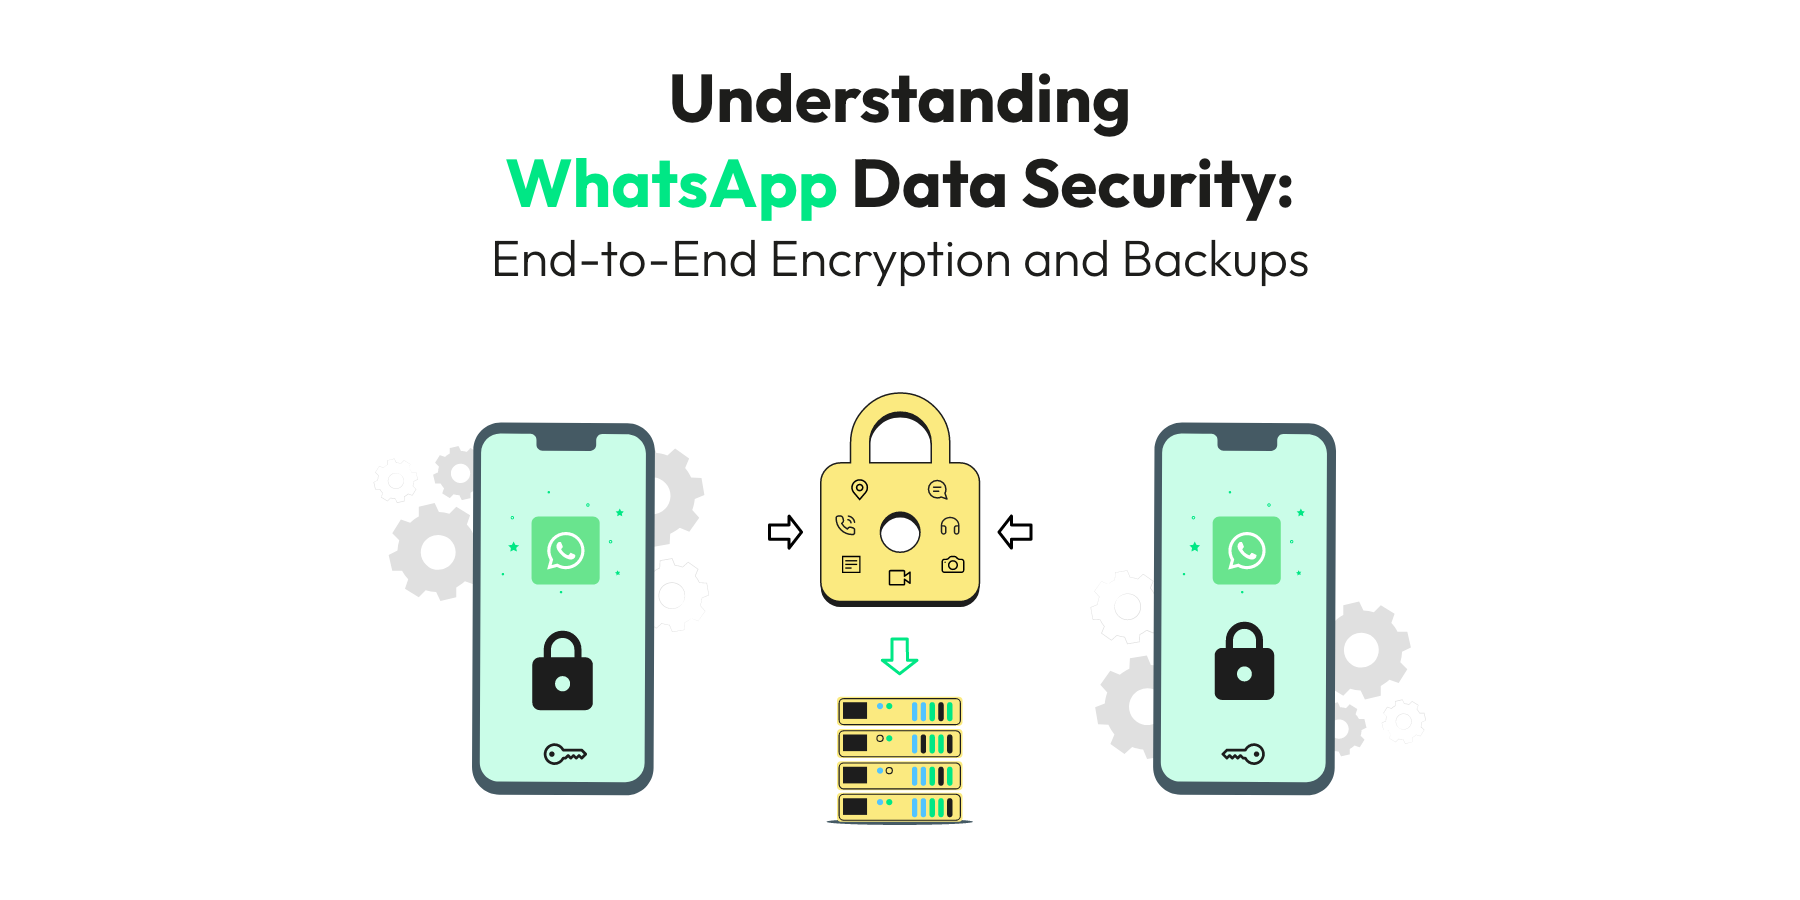 WhatsApp  Secure and Reliable Free Private Messaging and Calling